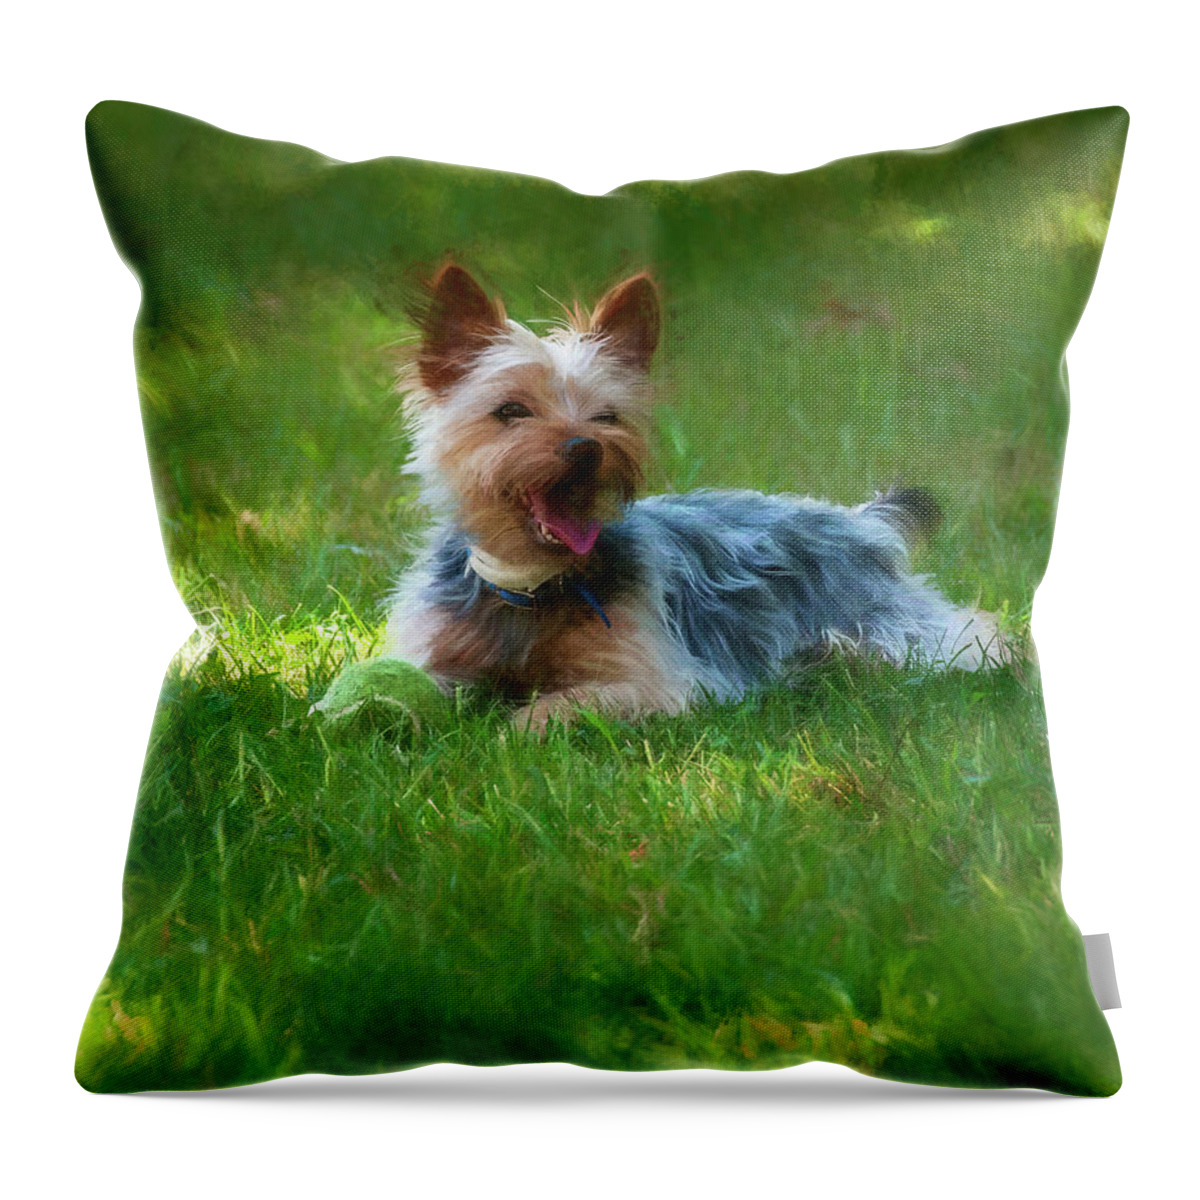 Dog Throw Pillow featuring the photograph Happy Dog by Cathy Kovarik